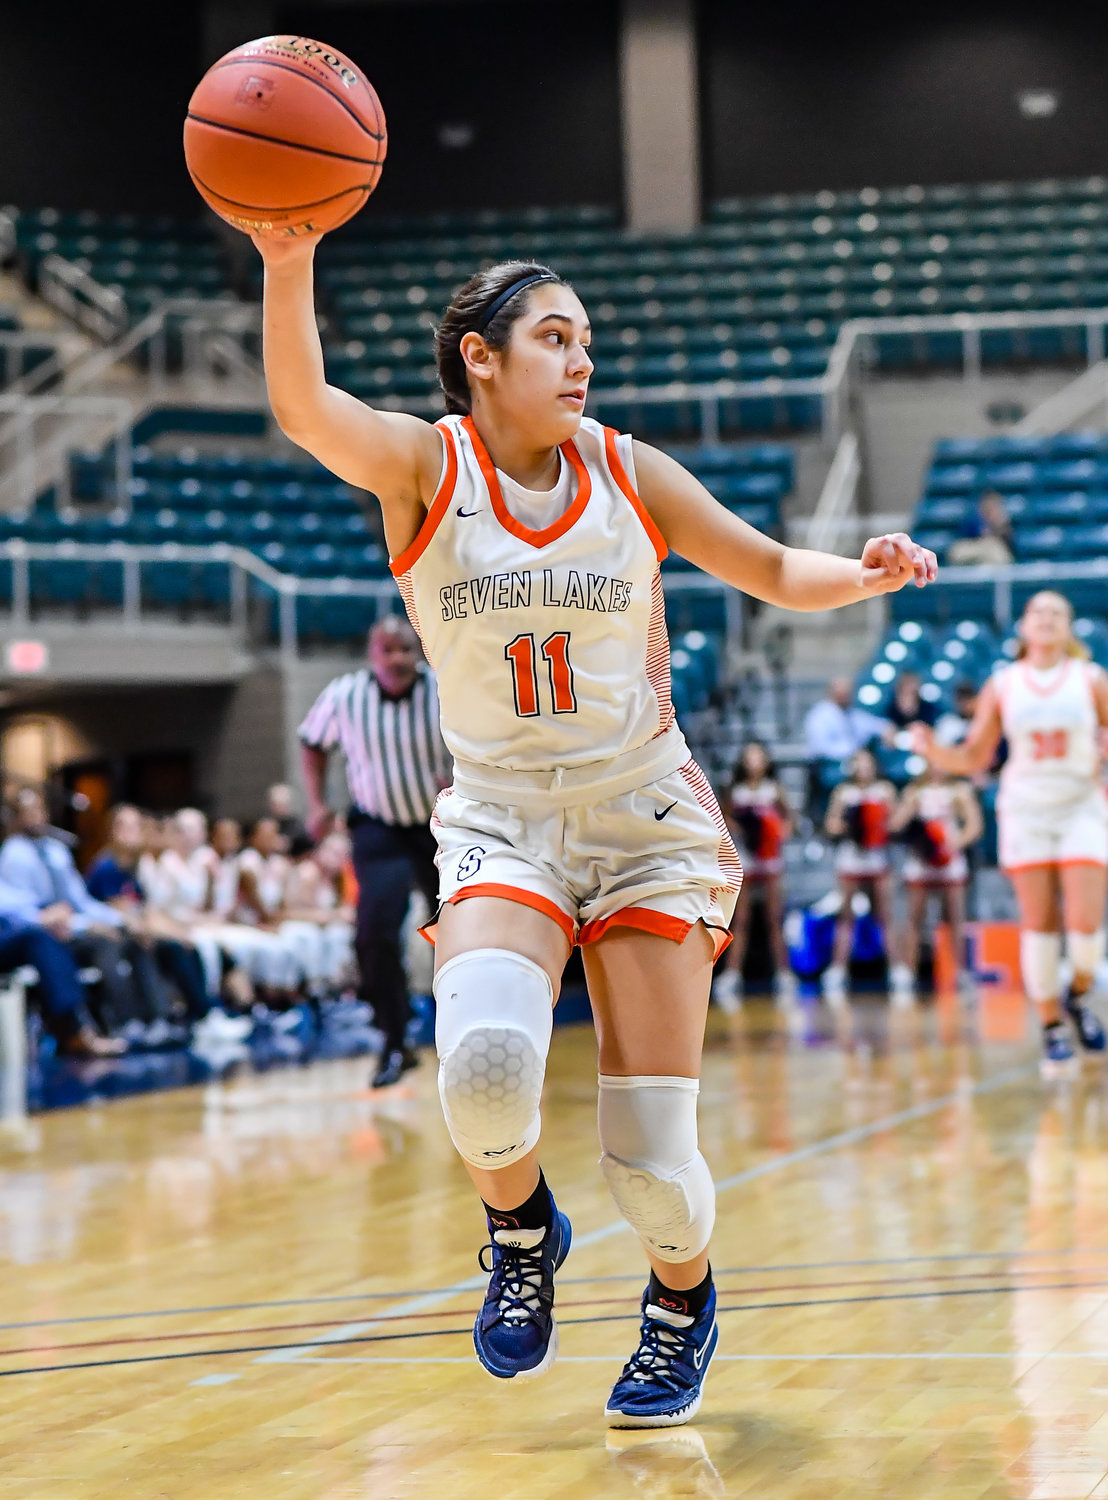 Katy Tx. Feb 22, 2022:  Seven Lakes Caitlyn Quintero #11 looks to pass the ball off during the Regional Quarterfinal playoff game, Seven Lakes vs Fort Bend Austin at the Merrell Center. (Photo by Mark Goodman / Katy Times)